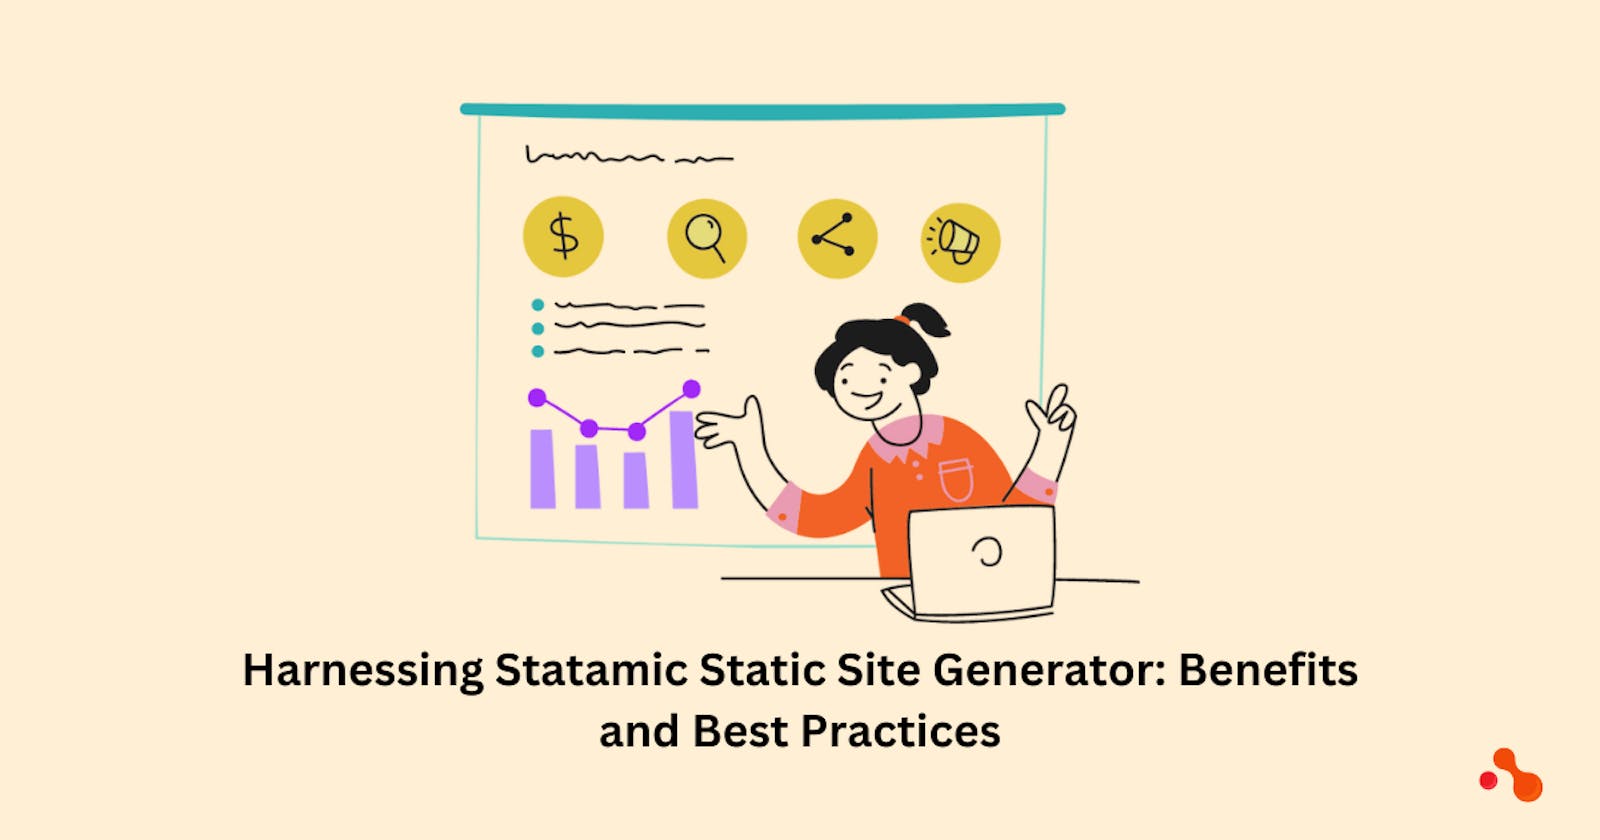 Harnessing Statamic Site Generator Advantages and Best Practices